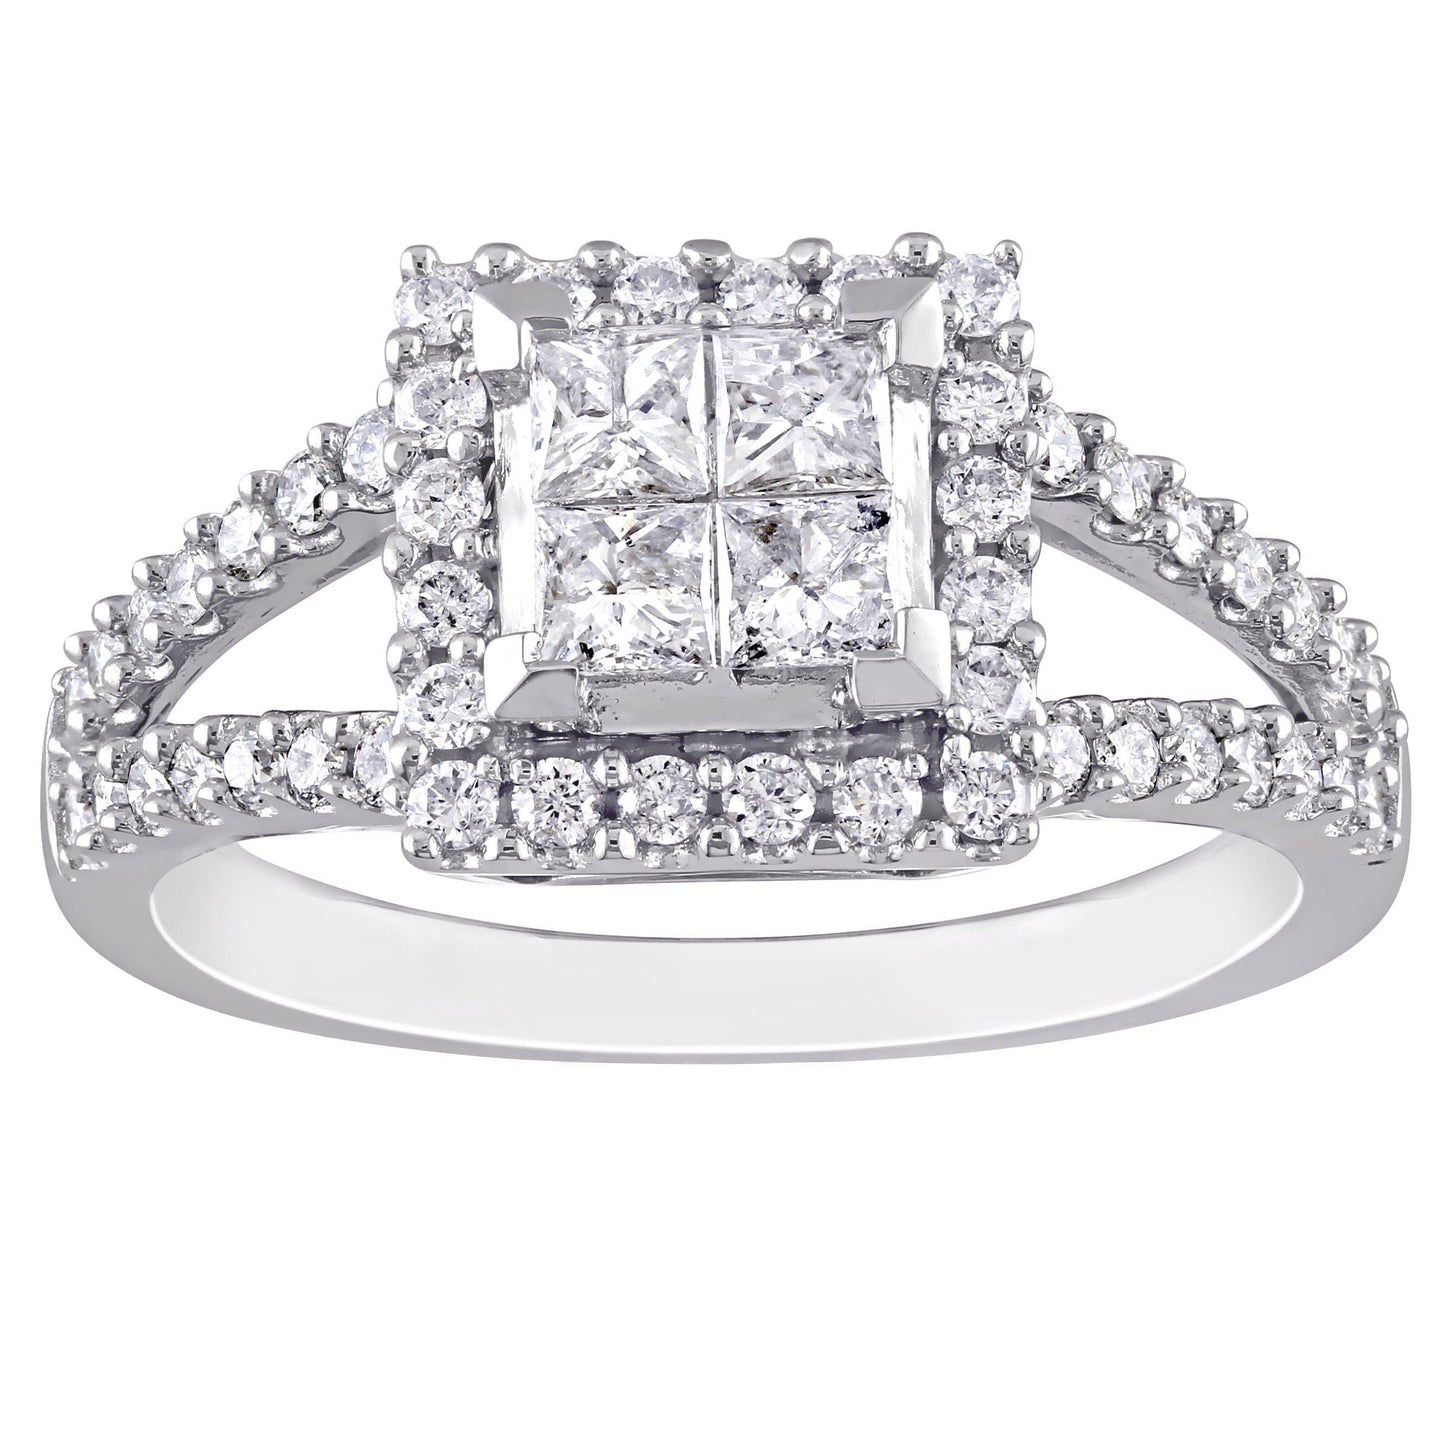 Julie Leah Diamond Halo Ring in 14k White Gold